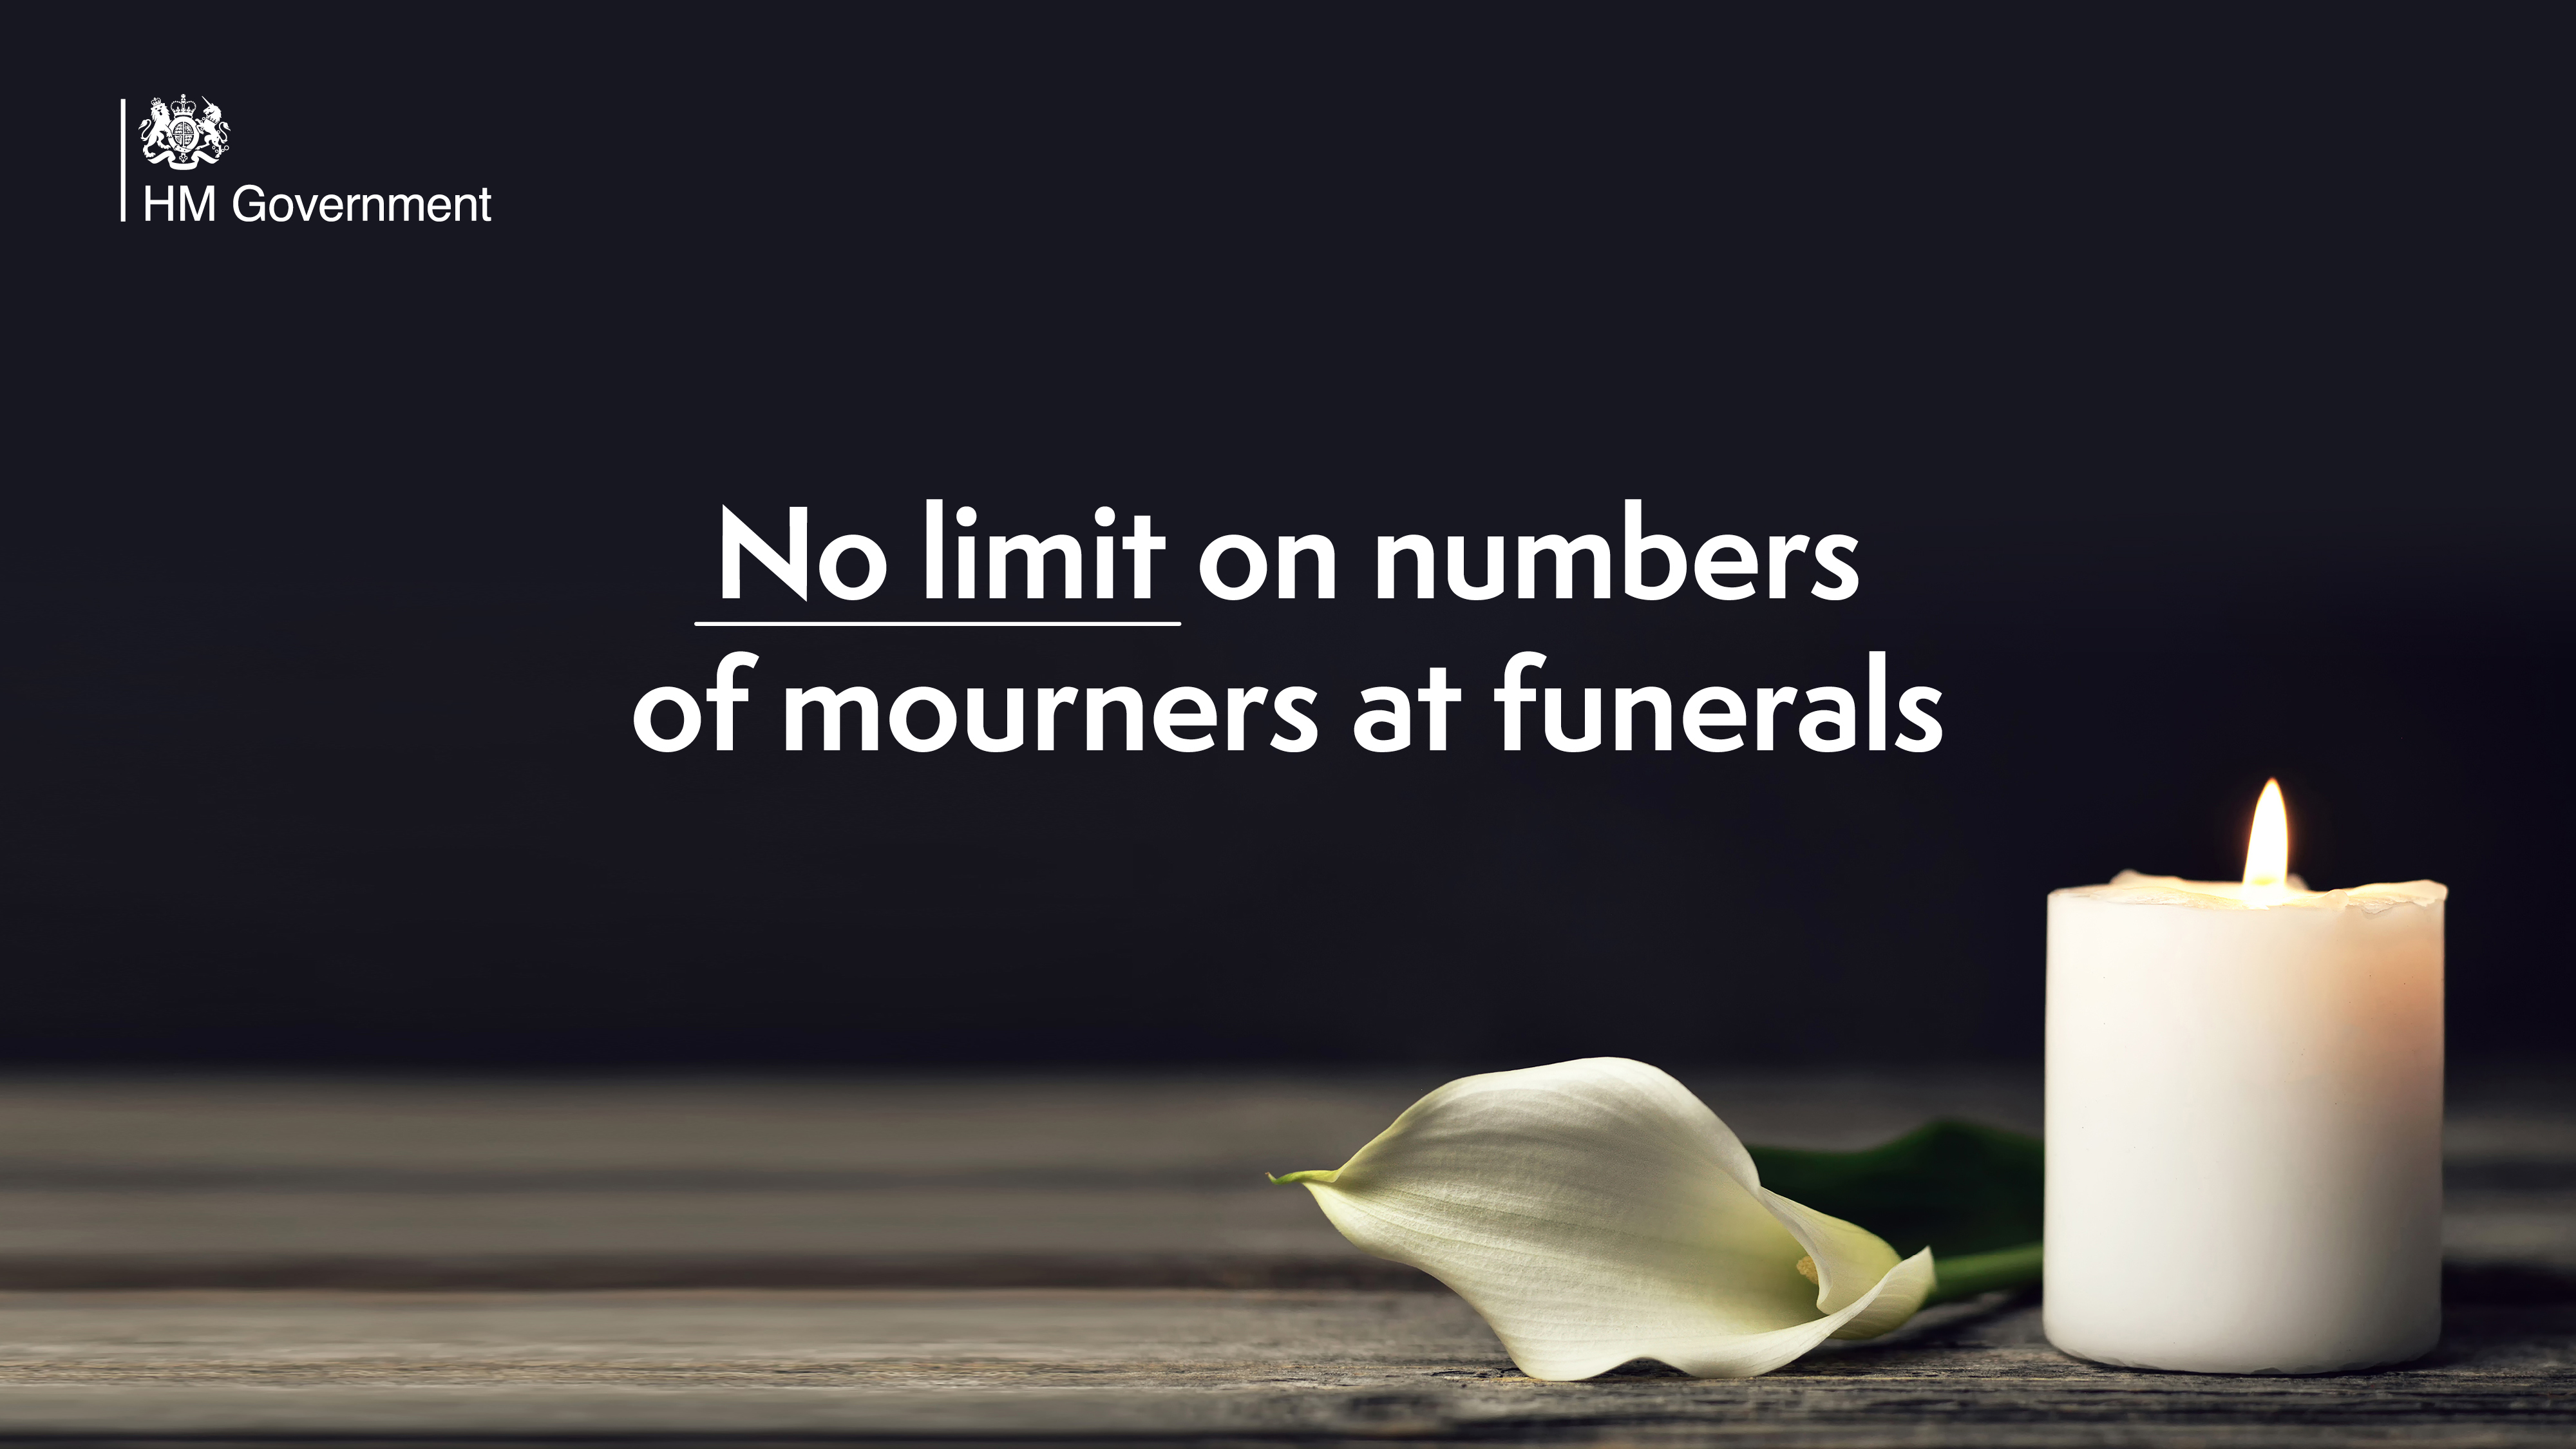 No limit on numbers of mourners at funerals